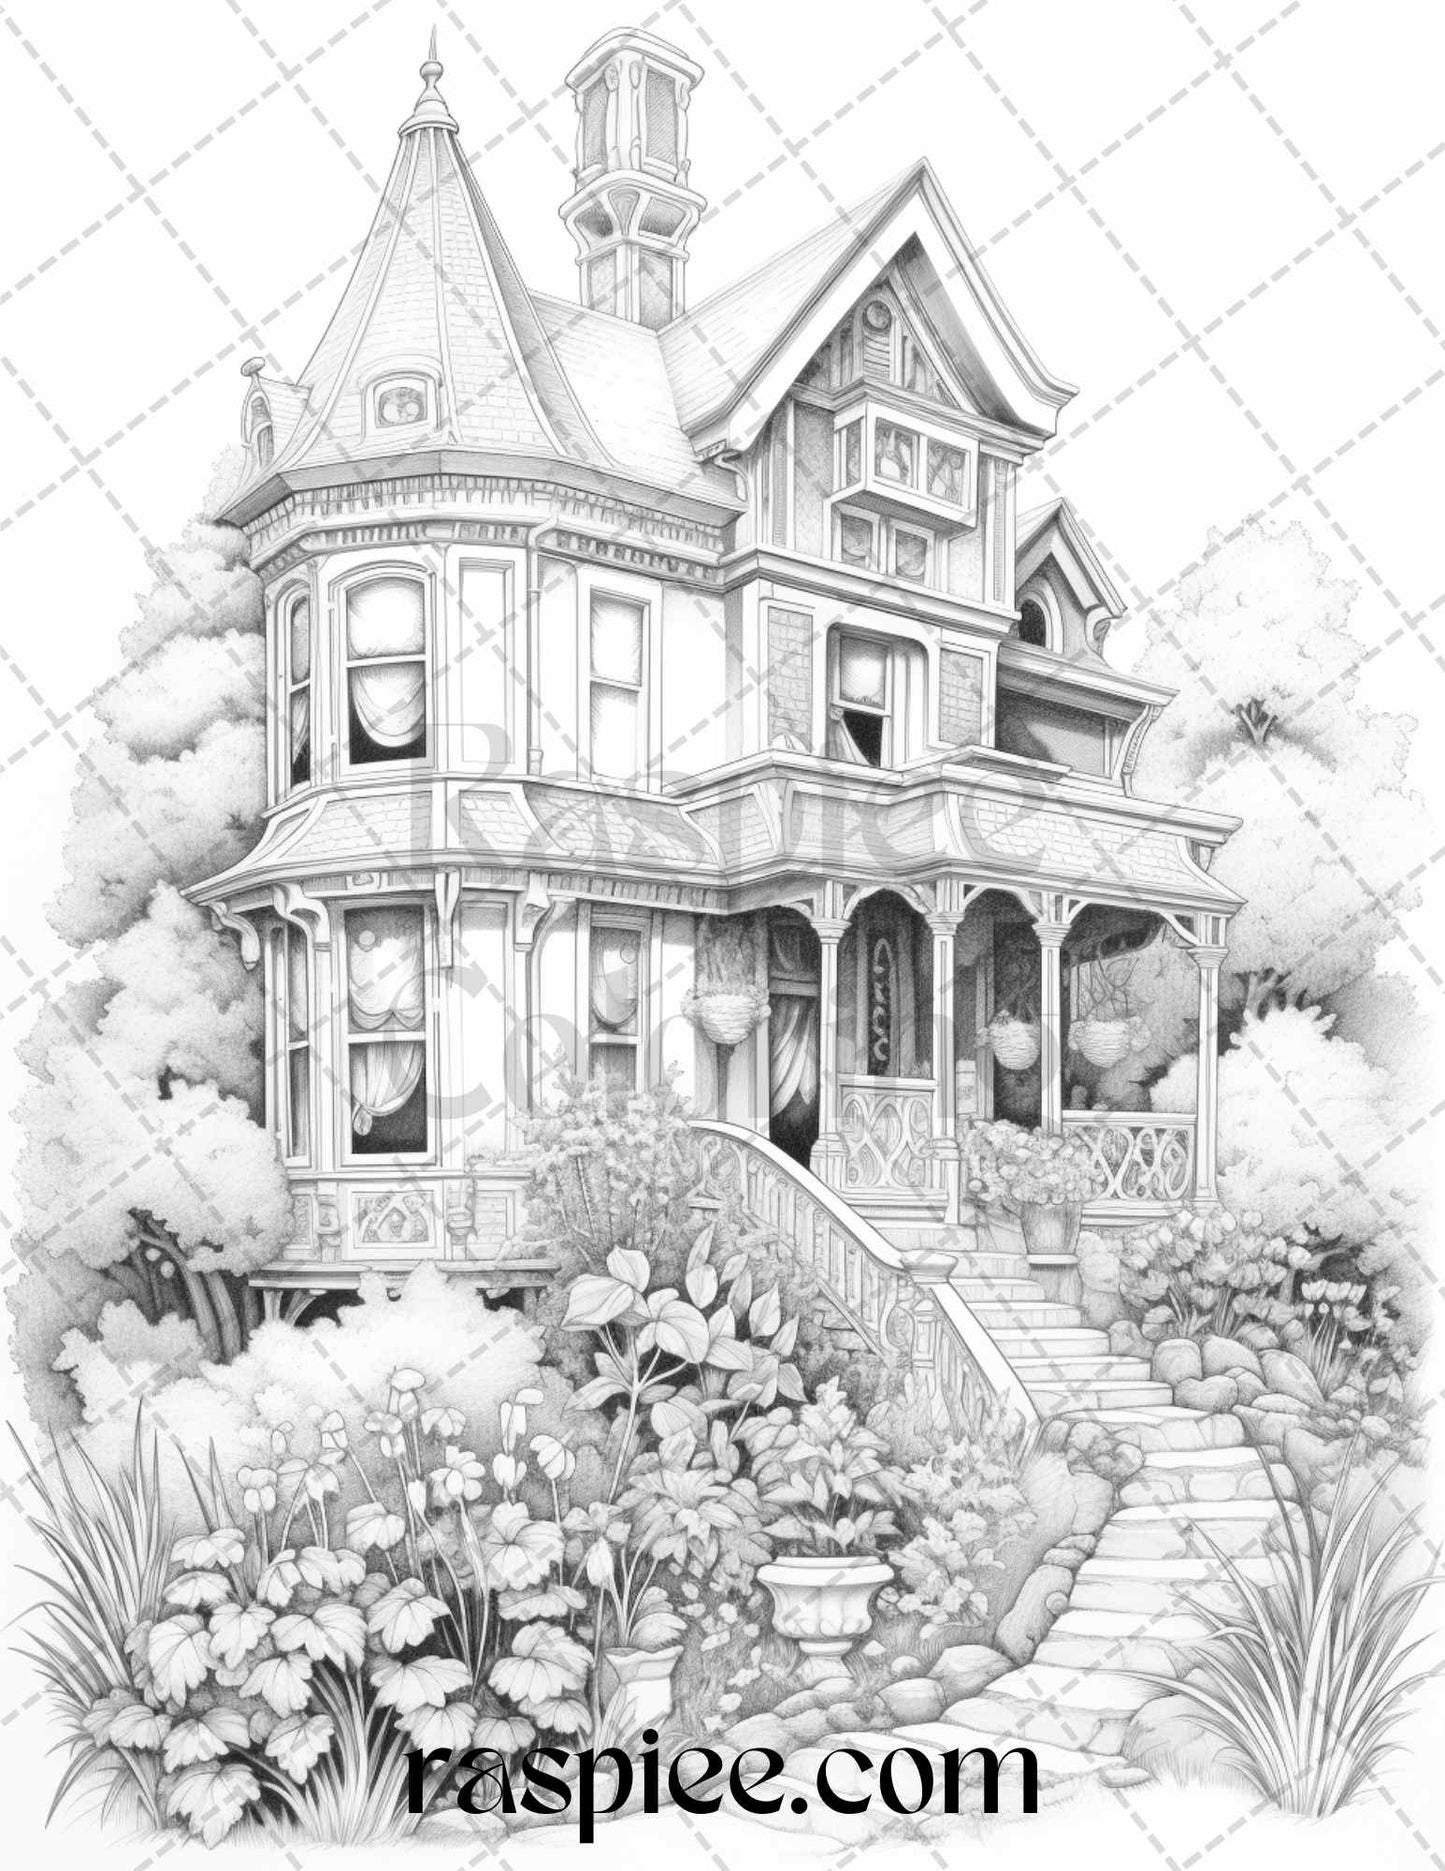 40 Victorian Houses Grayscale Coloring Pages Printable for Adults, PDF File Instant Download - raspiee